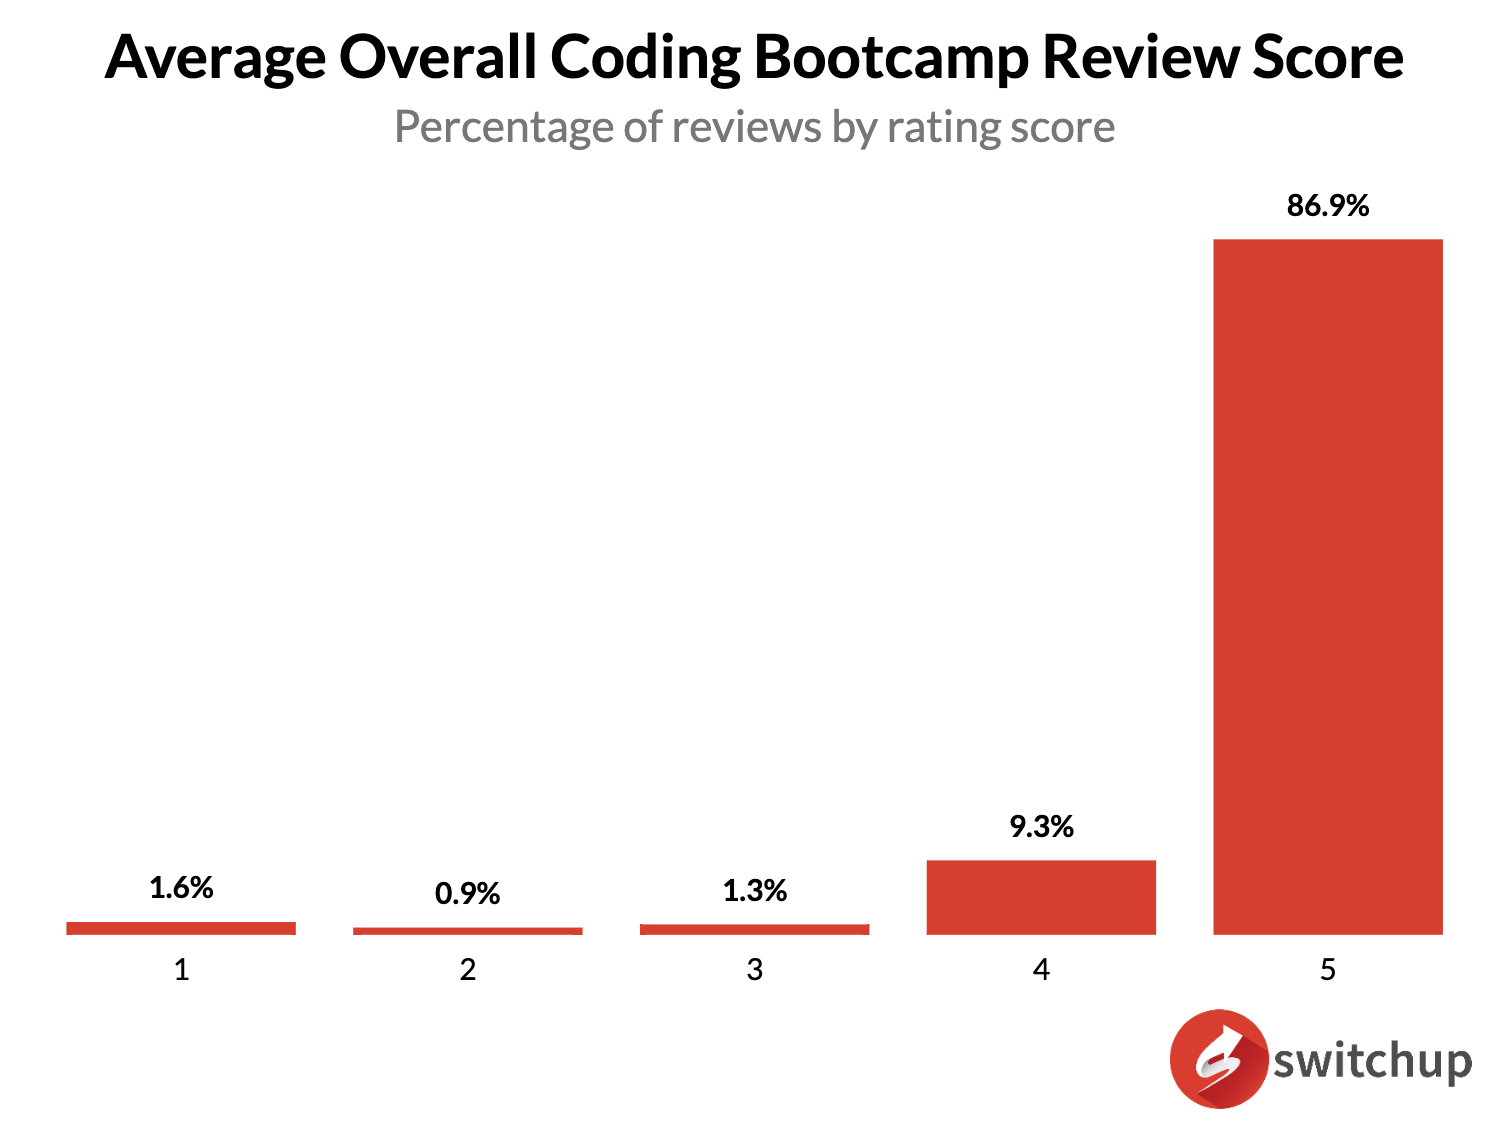 Chart 1: Percentage of reviews by rating score. (E.g. 86.9% of reviewers gave an average overall rating of 5.)